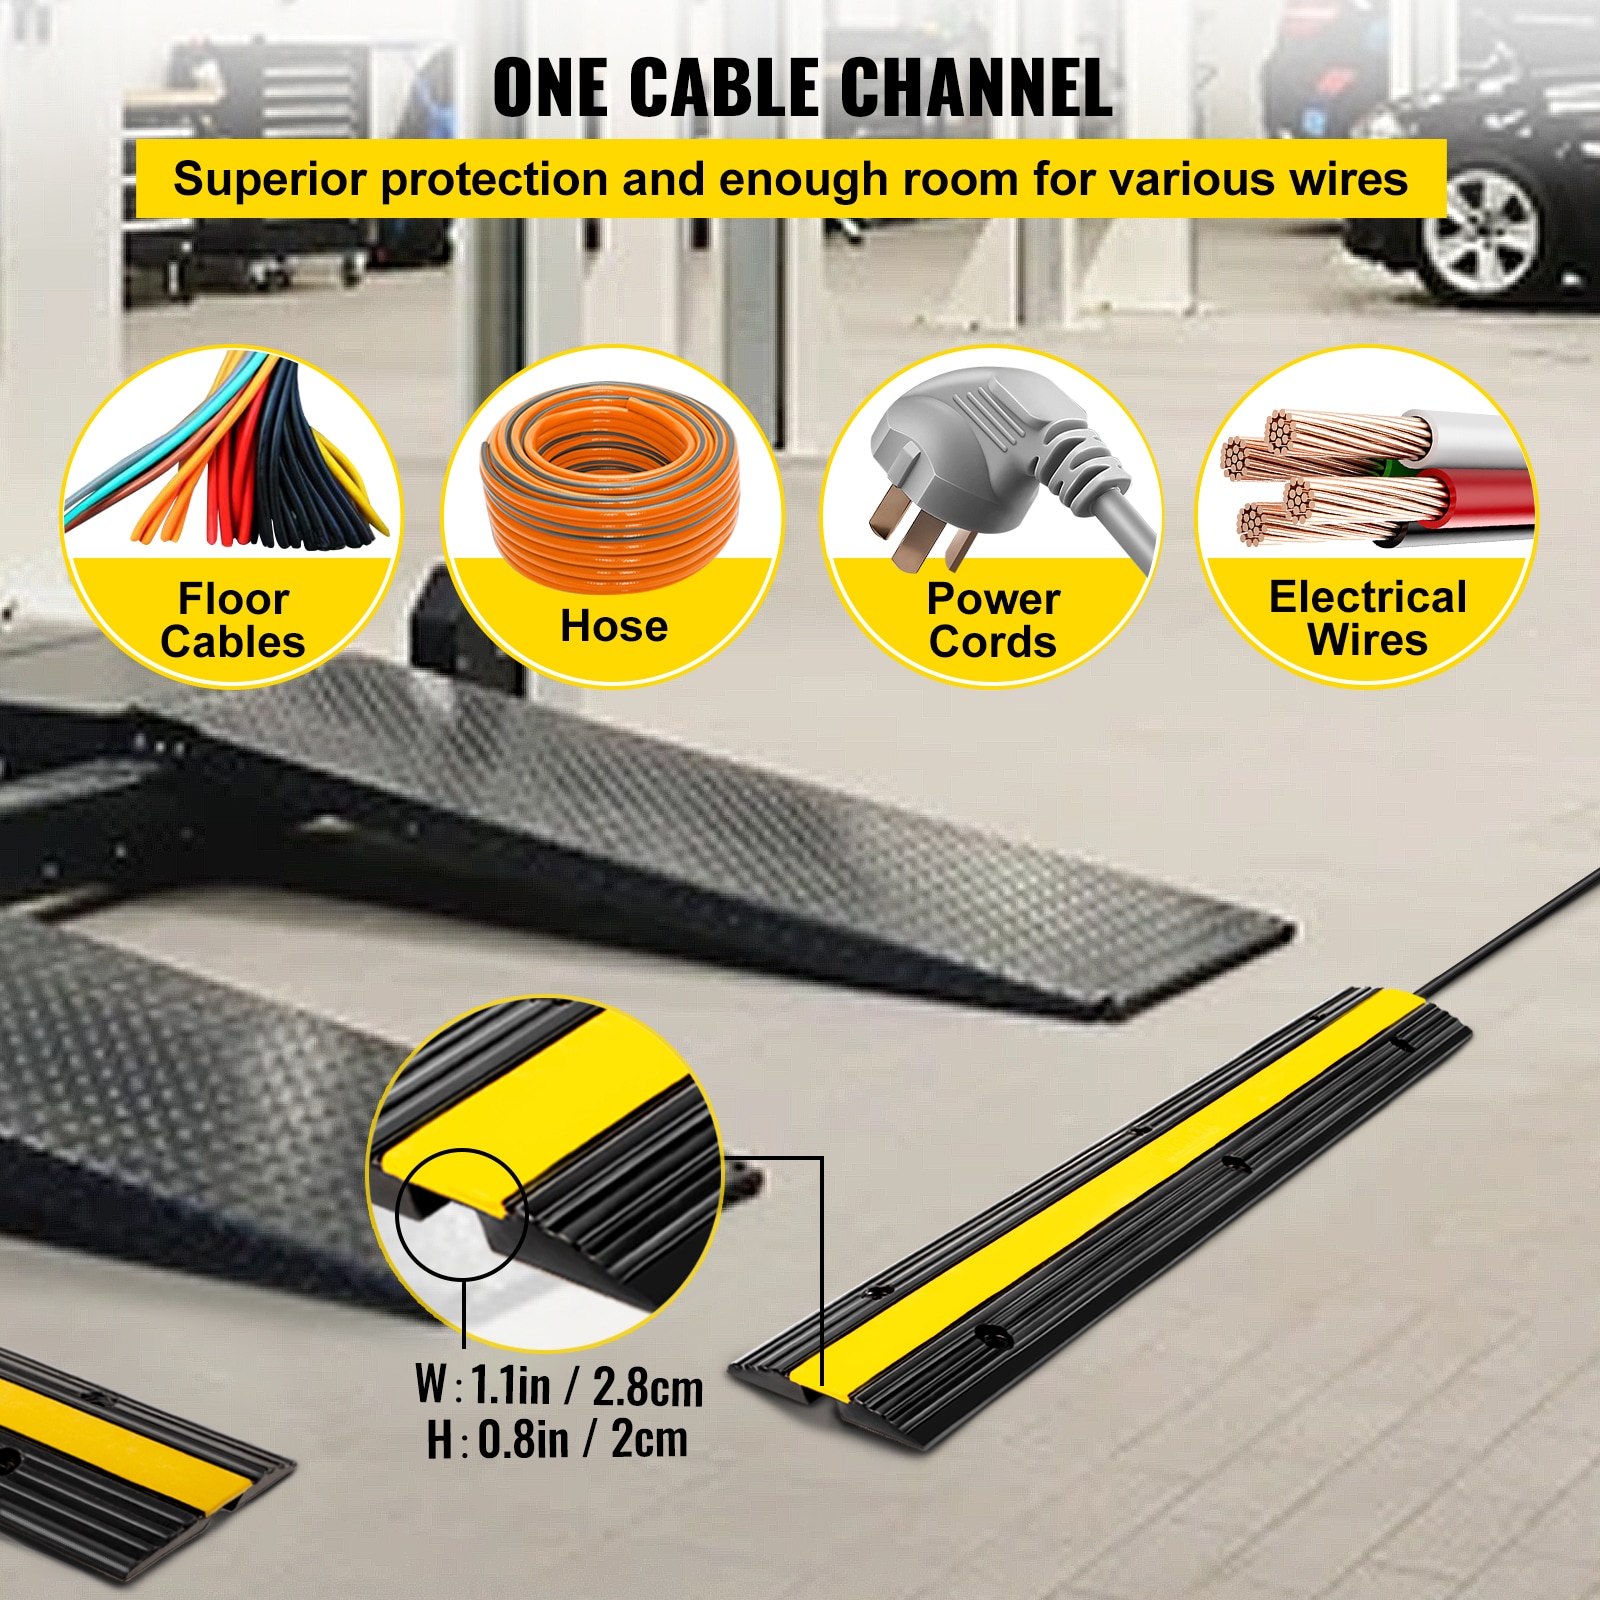  6.5 Feet Heavy Duty Cable Protector + Cord Cover — 3 Cord  Channels — Durable Black PVC is Flexible, Odor Free, Easy to Unroll and  Open — Conceal Wires at Home